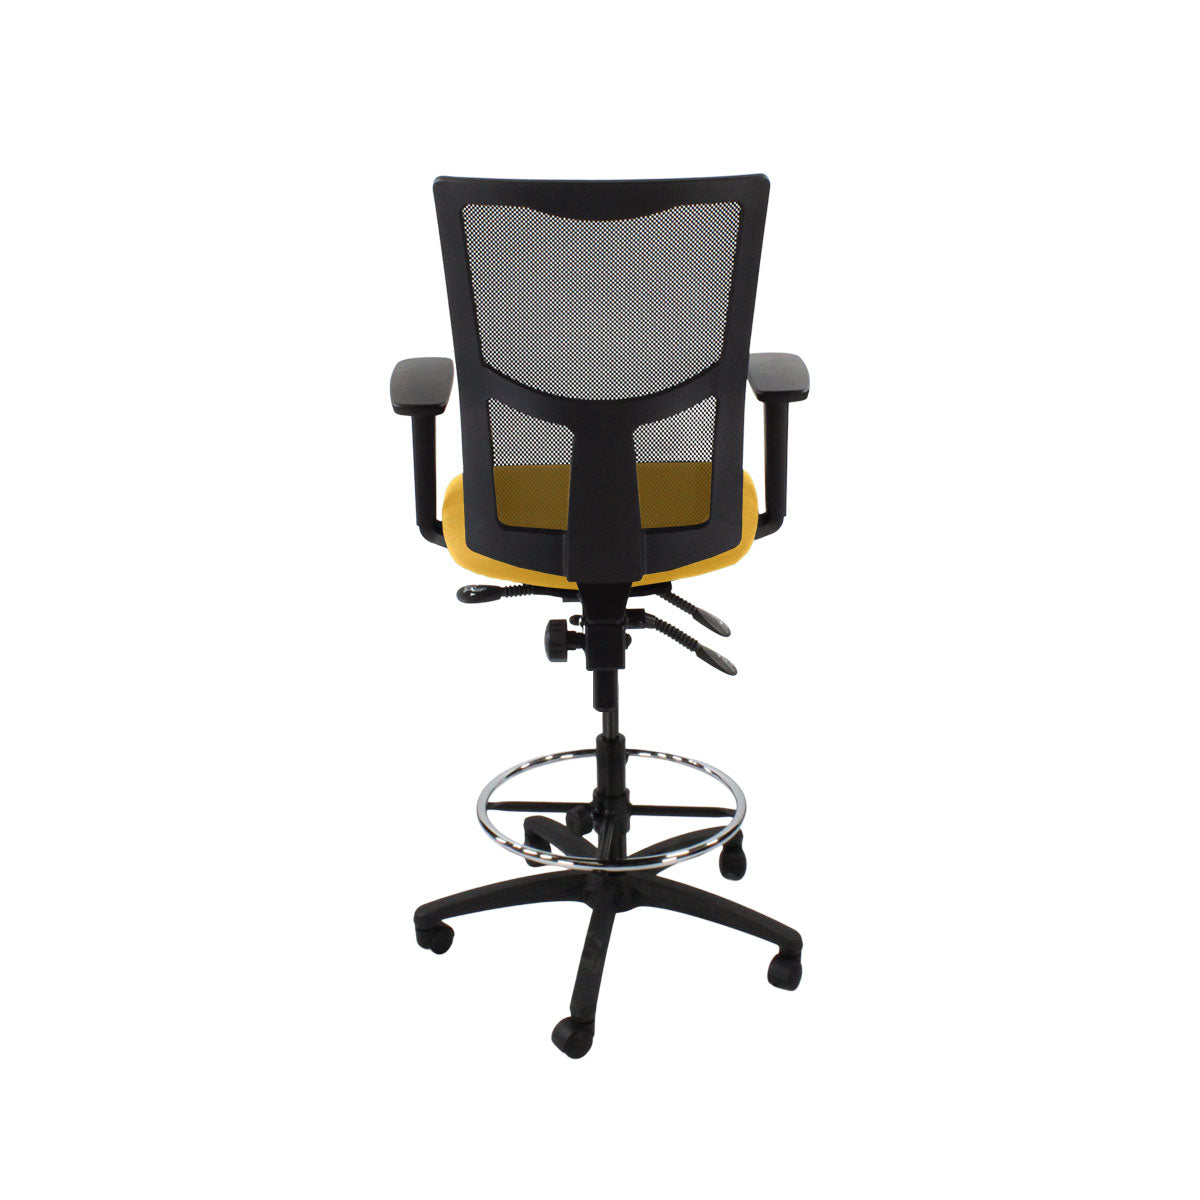 TOC: Ergo 2 Draughtsman Chair in Yellow Fabric - Refurbished